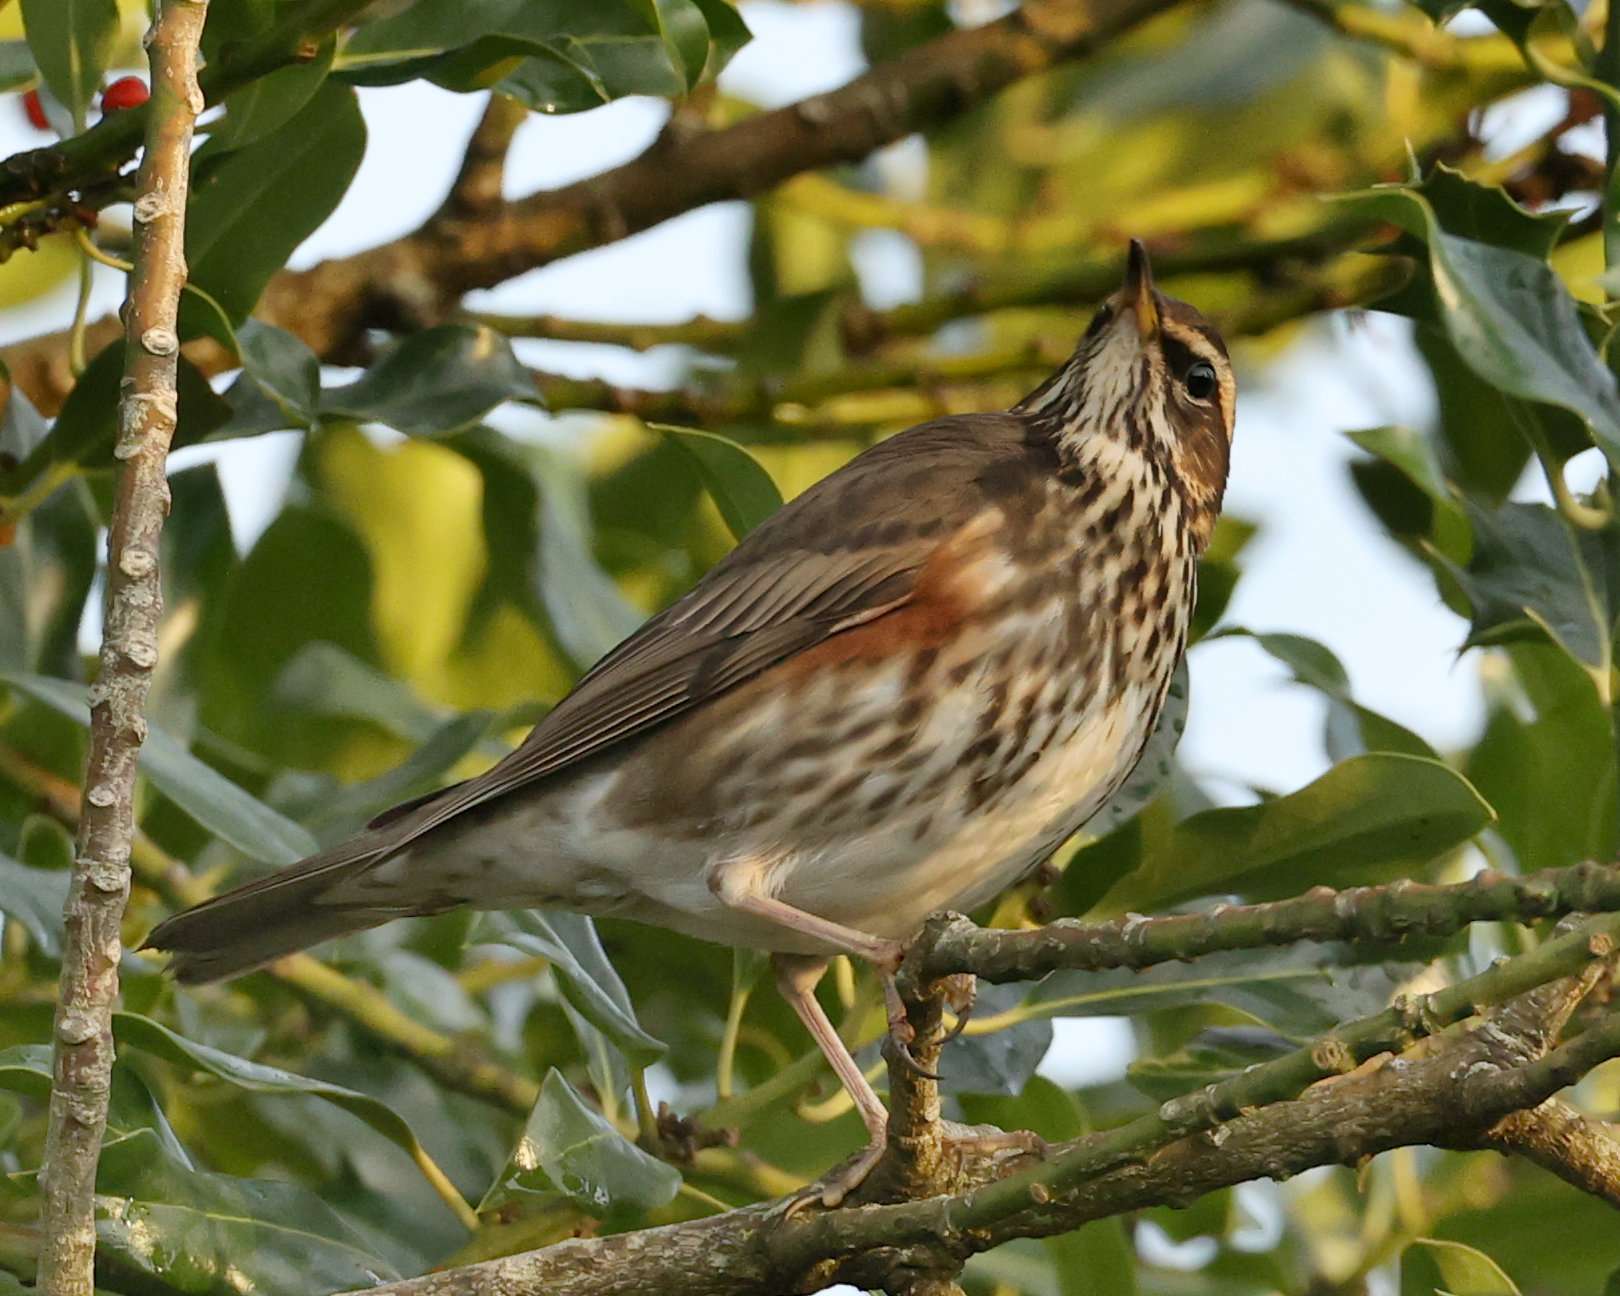 Redwing by Steve Hopper at South Brent